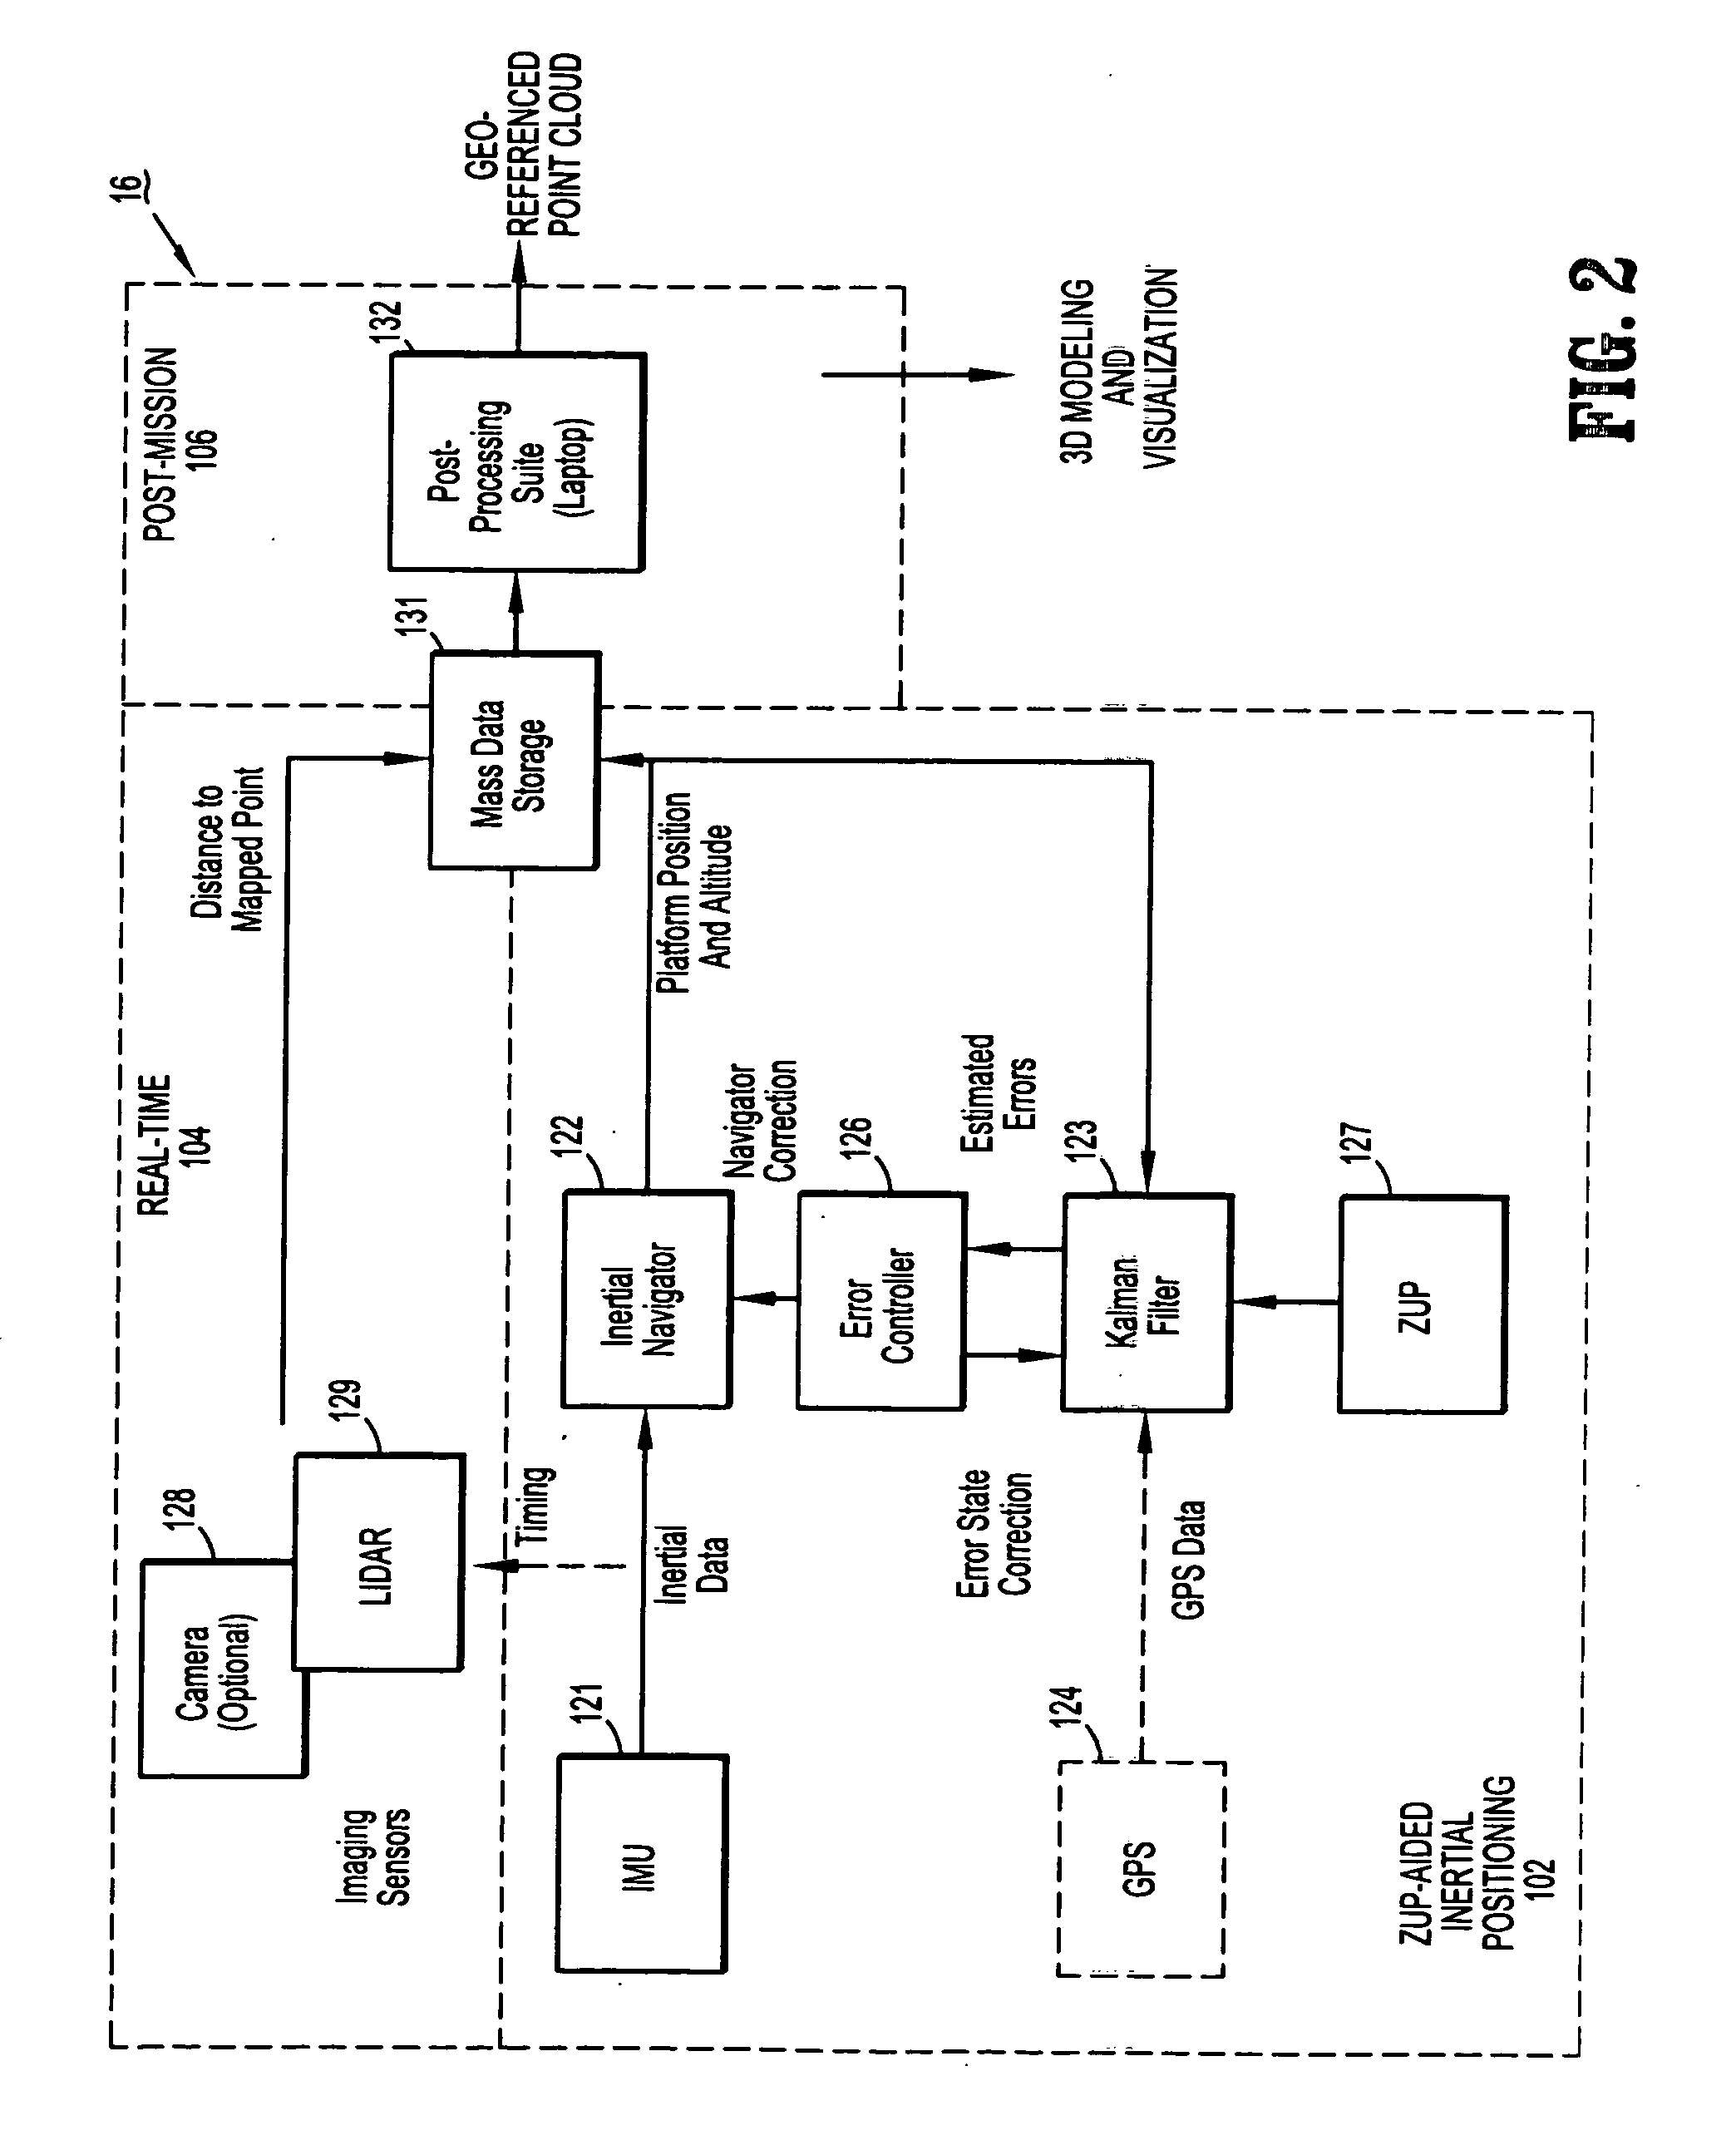 Systems and methods for processing mapping and modeling data